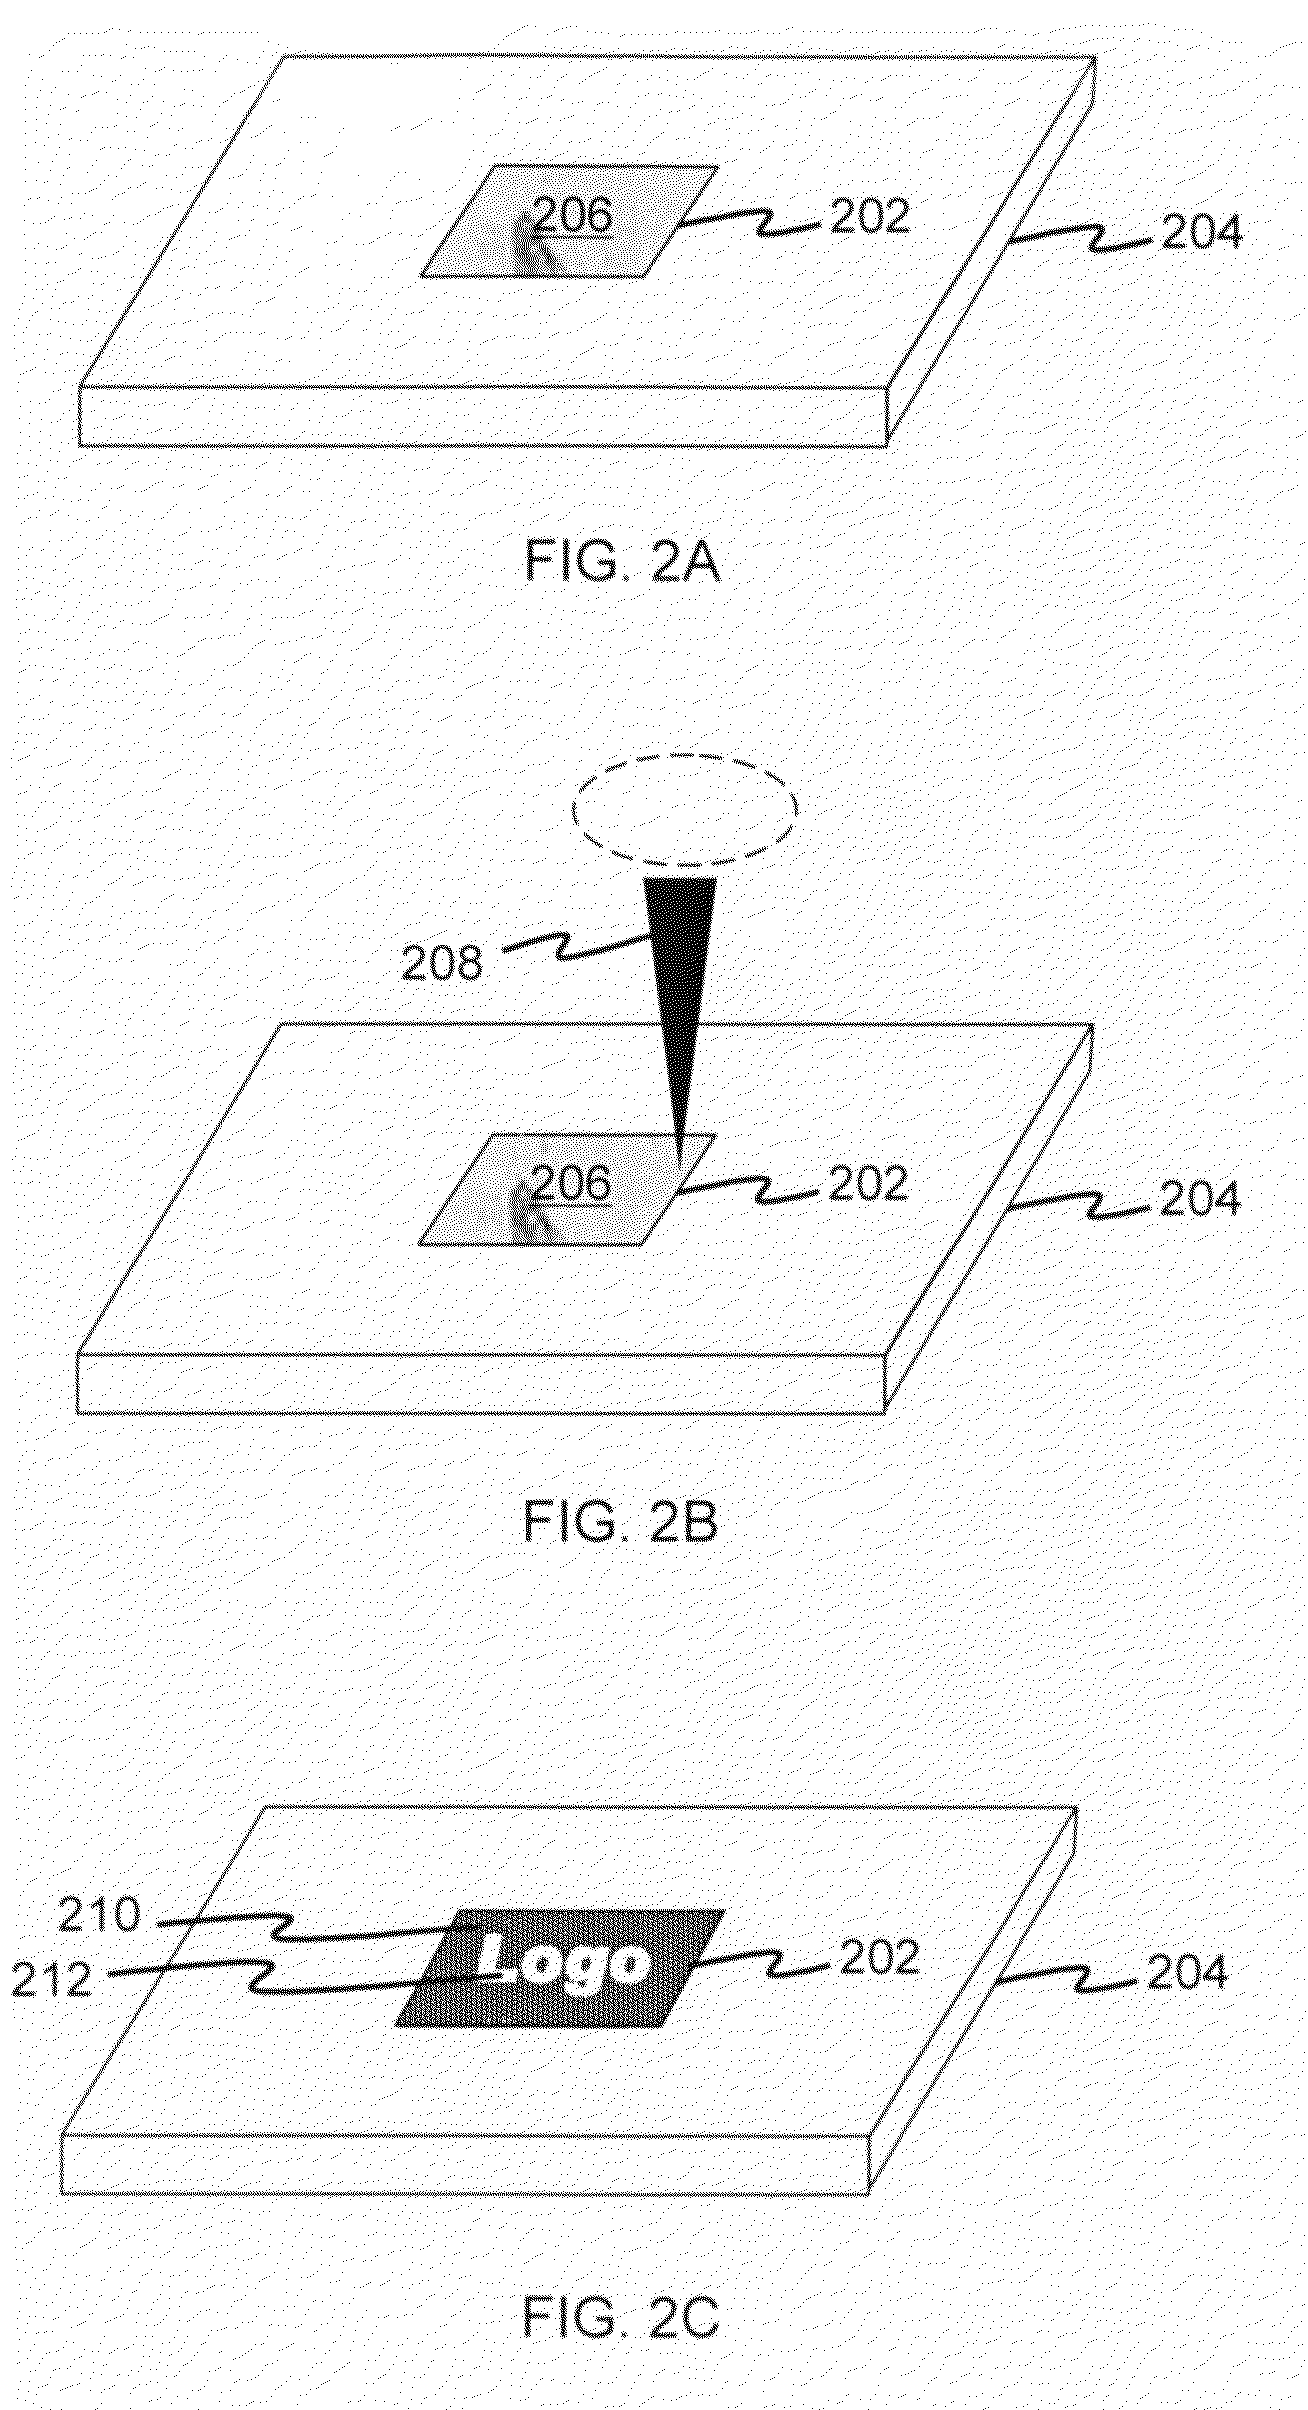 Methods for concealing surface defects